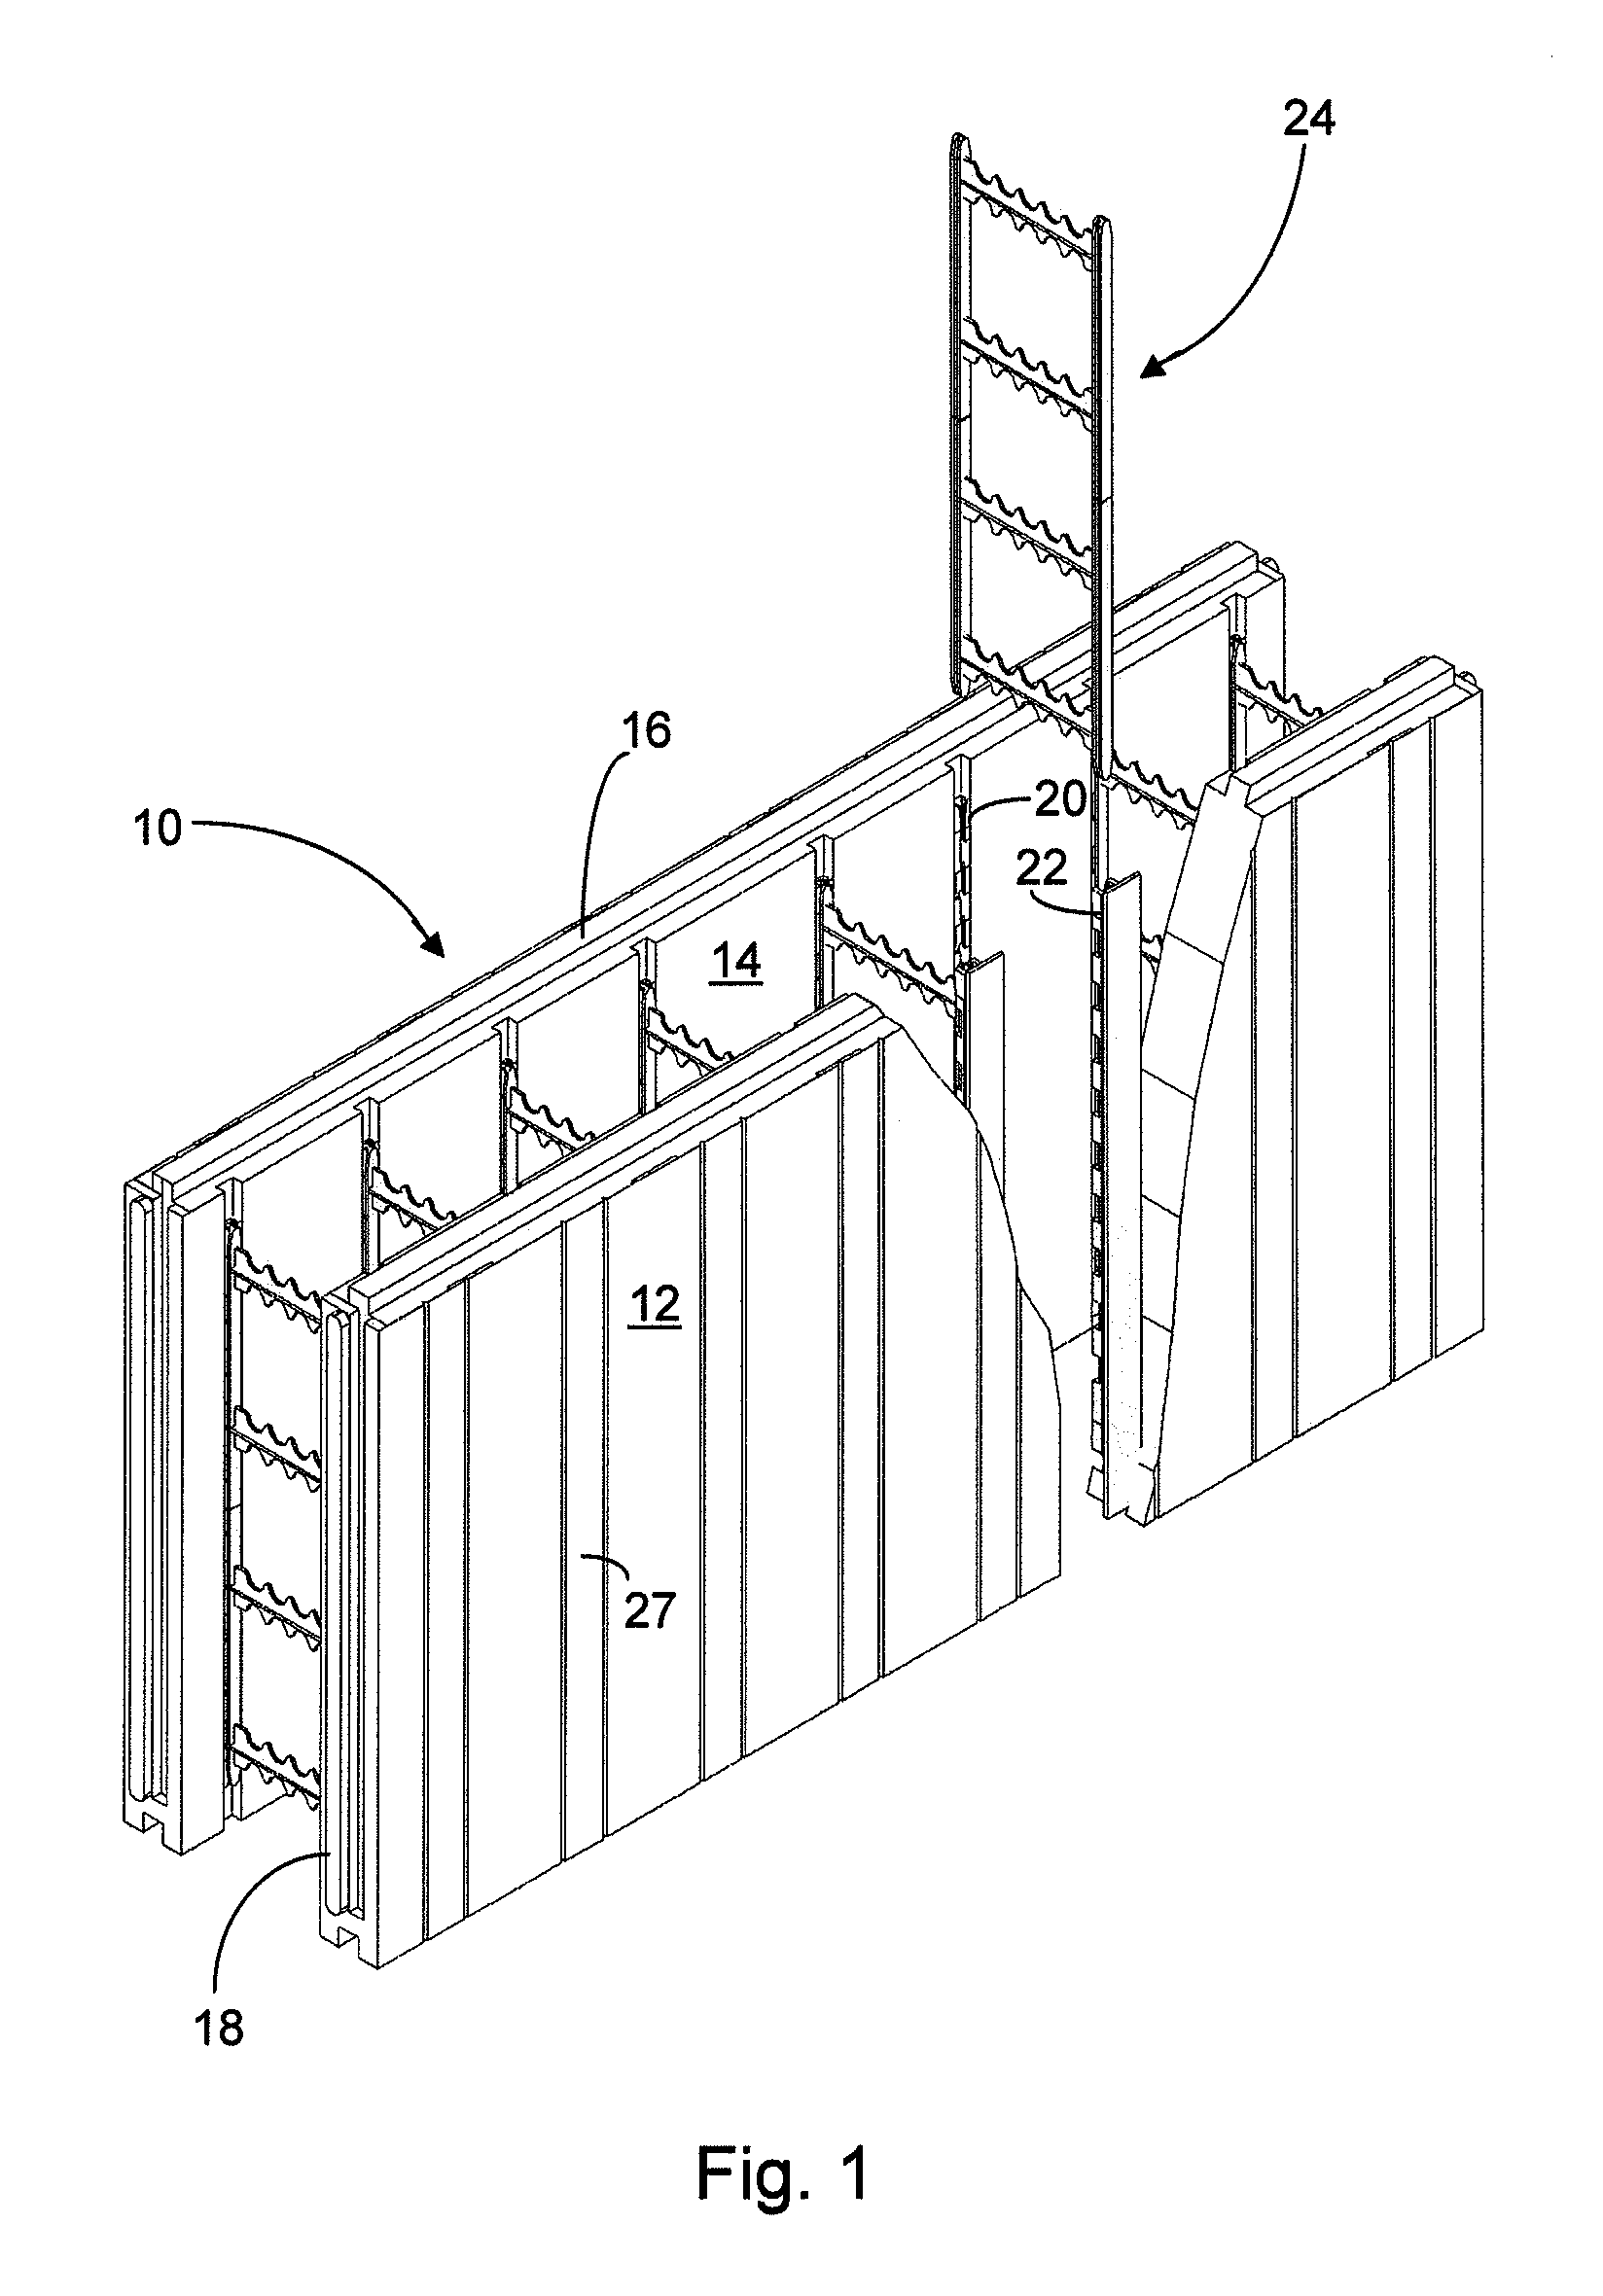 Insulating concrete form having locking mechanism engaging tie with anchor